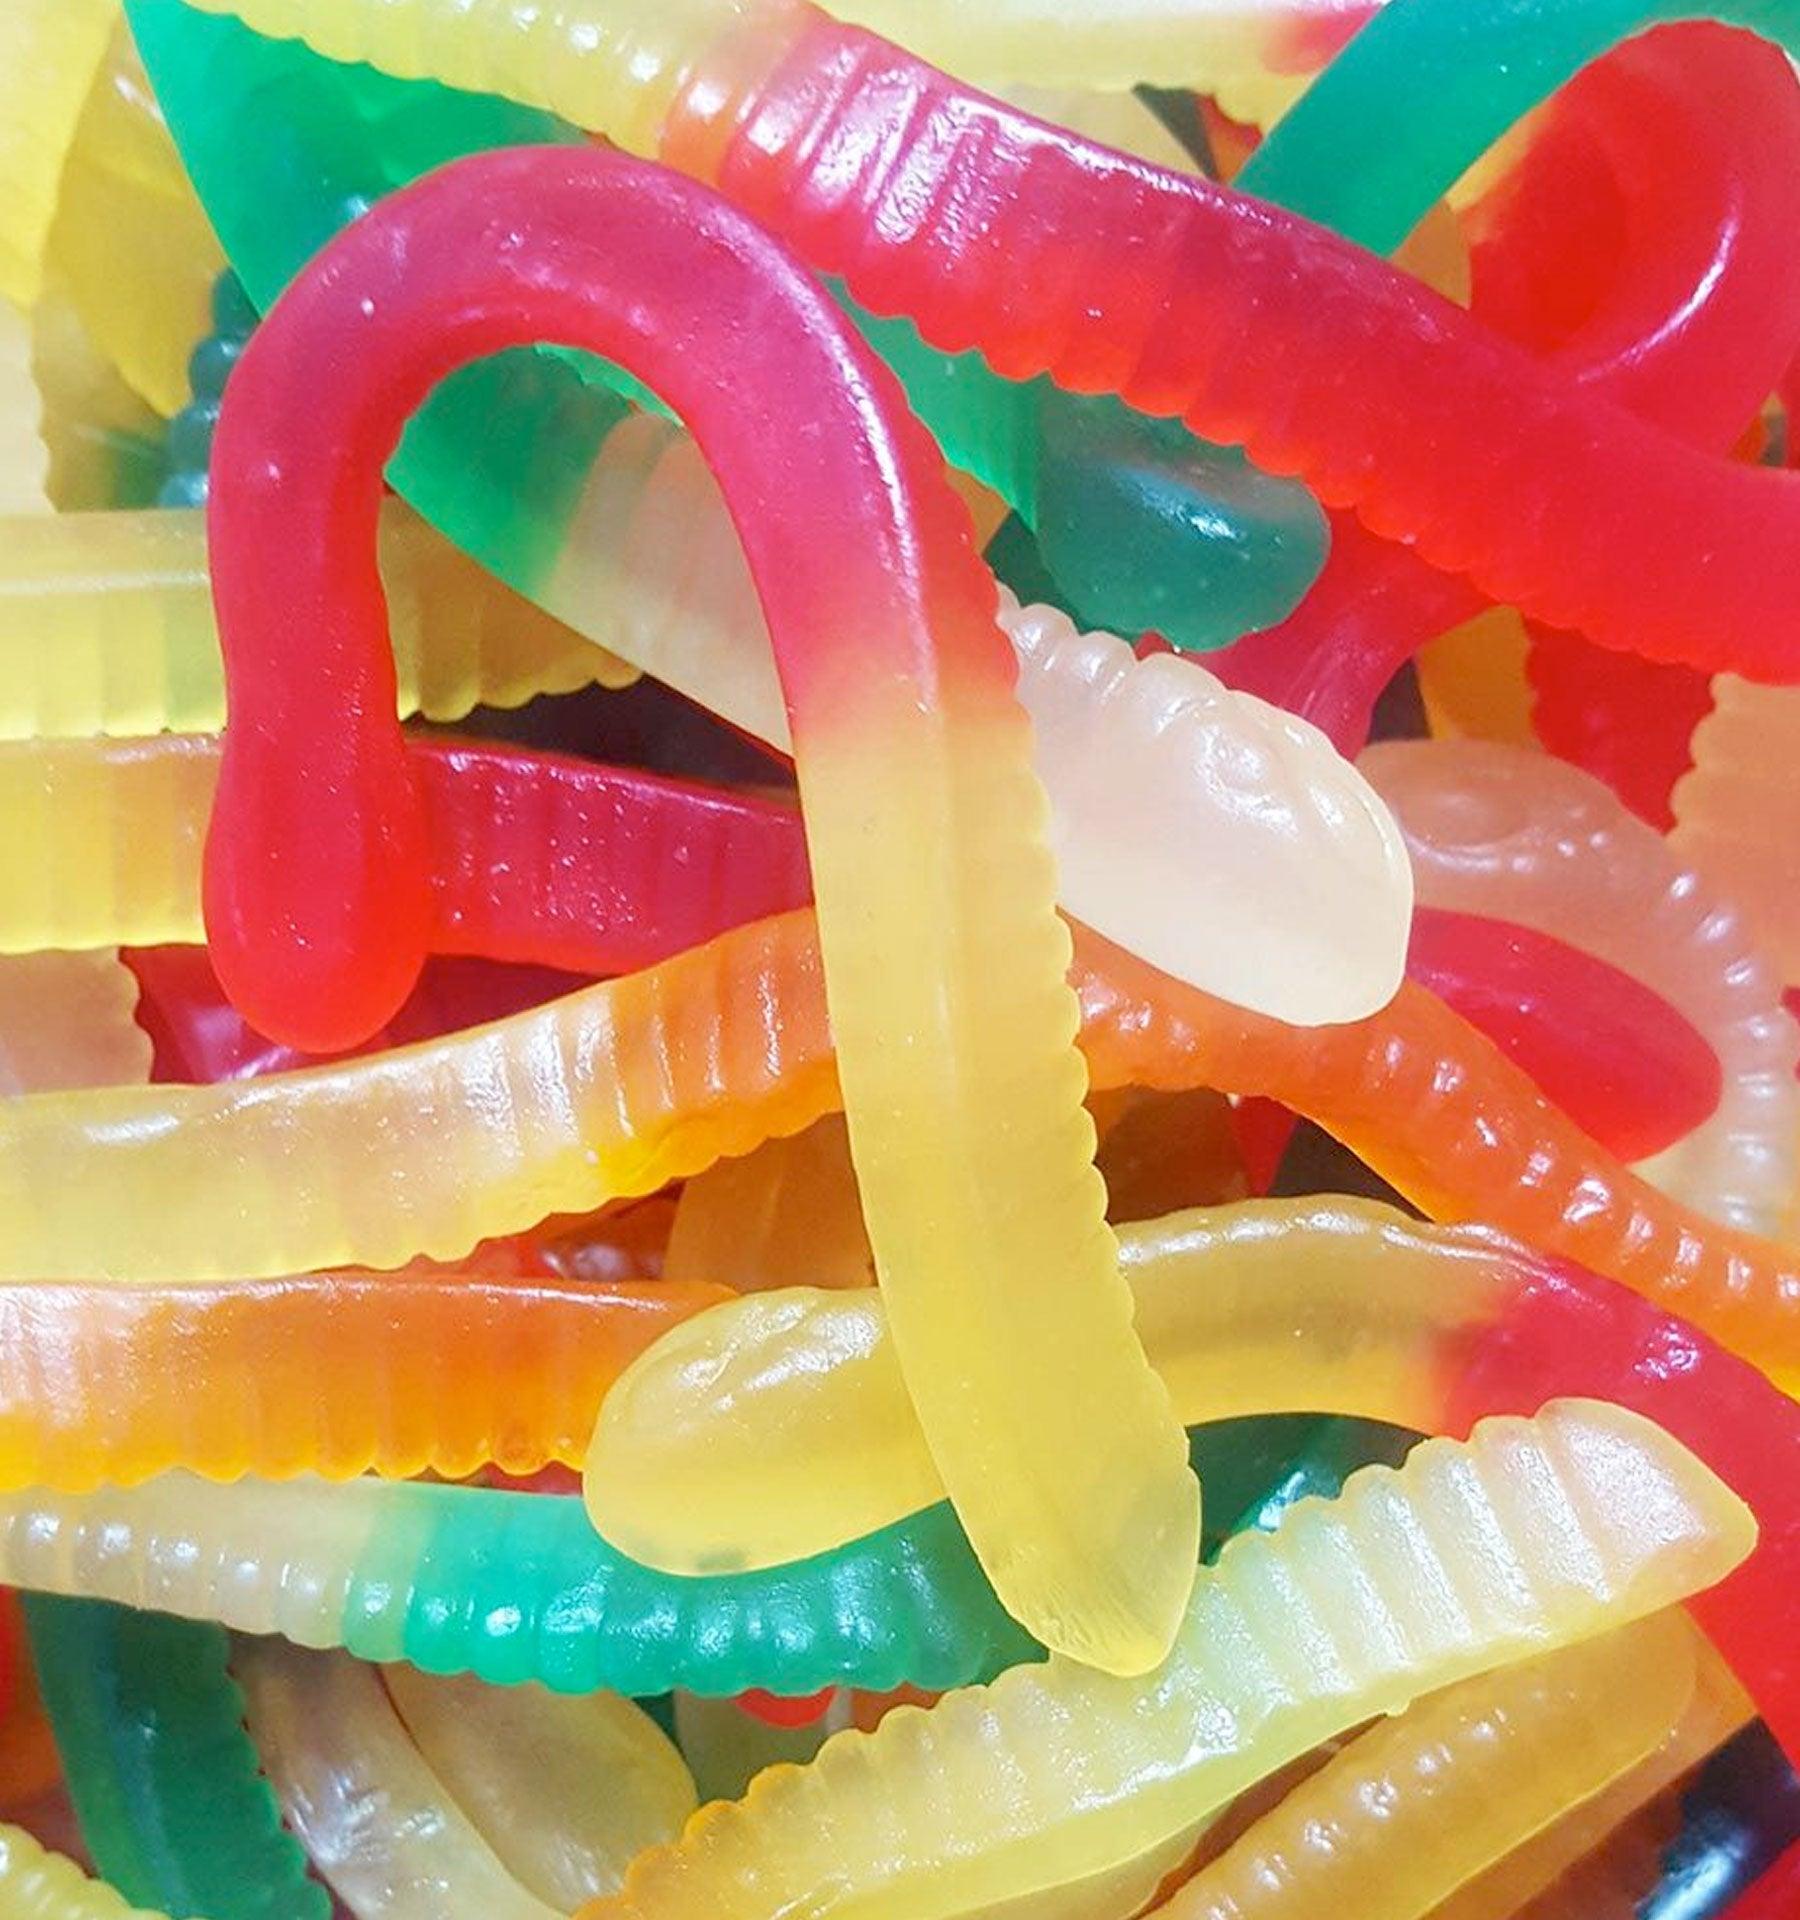 Jelly Worms Sweets Bag (80g) - Islamic Pixels